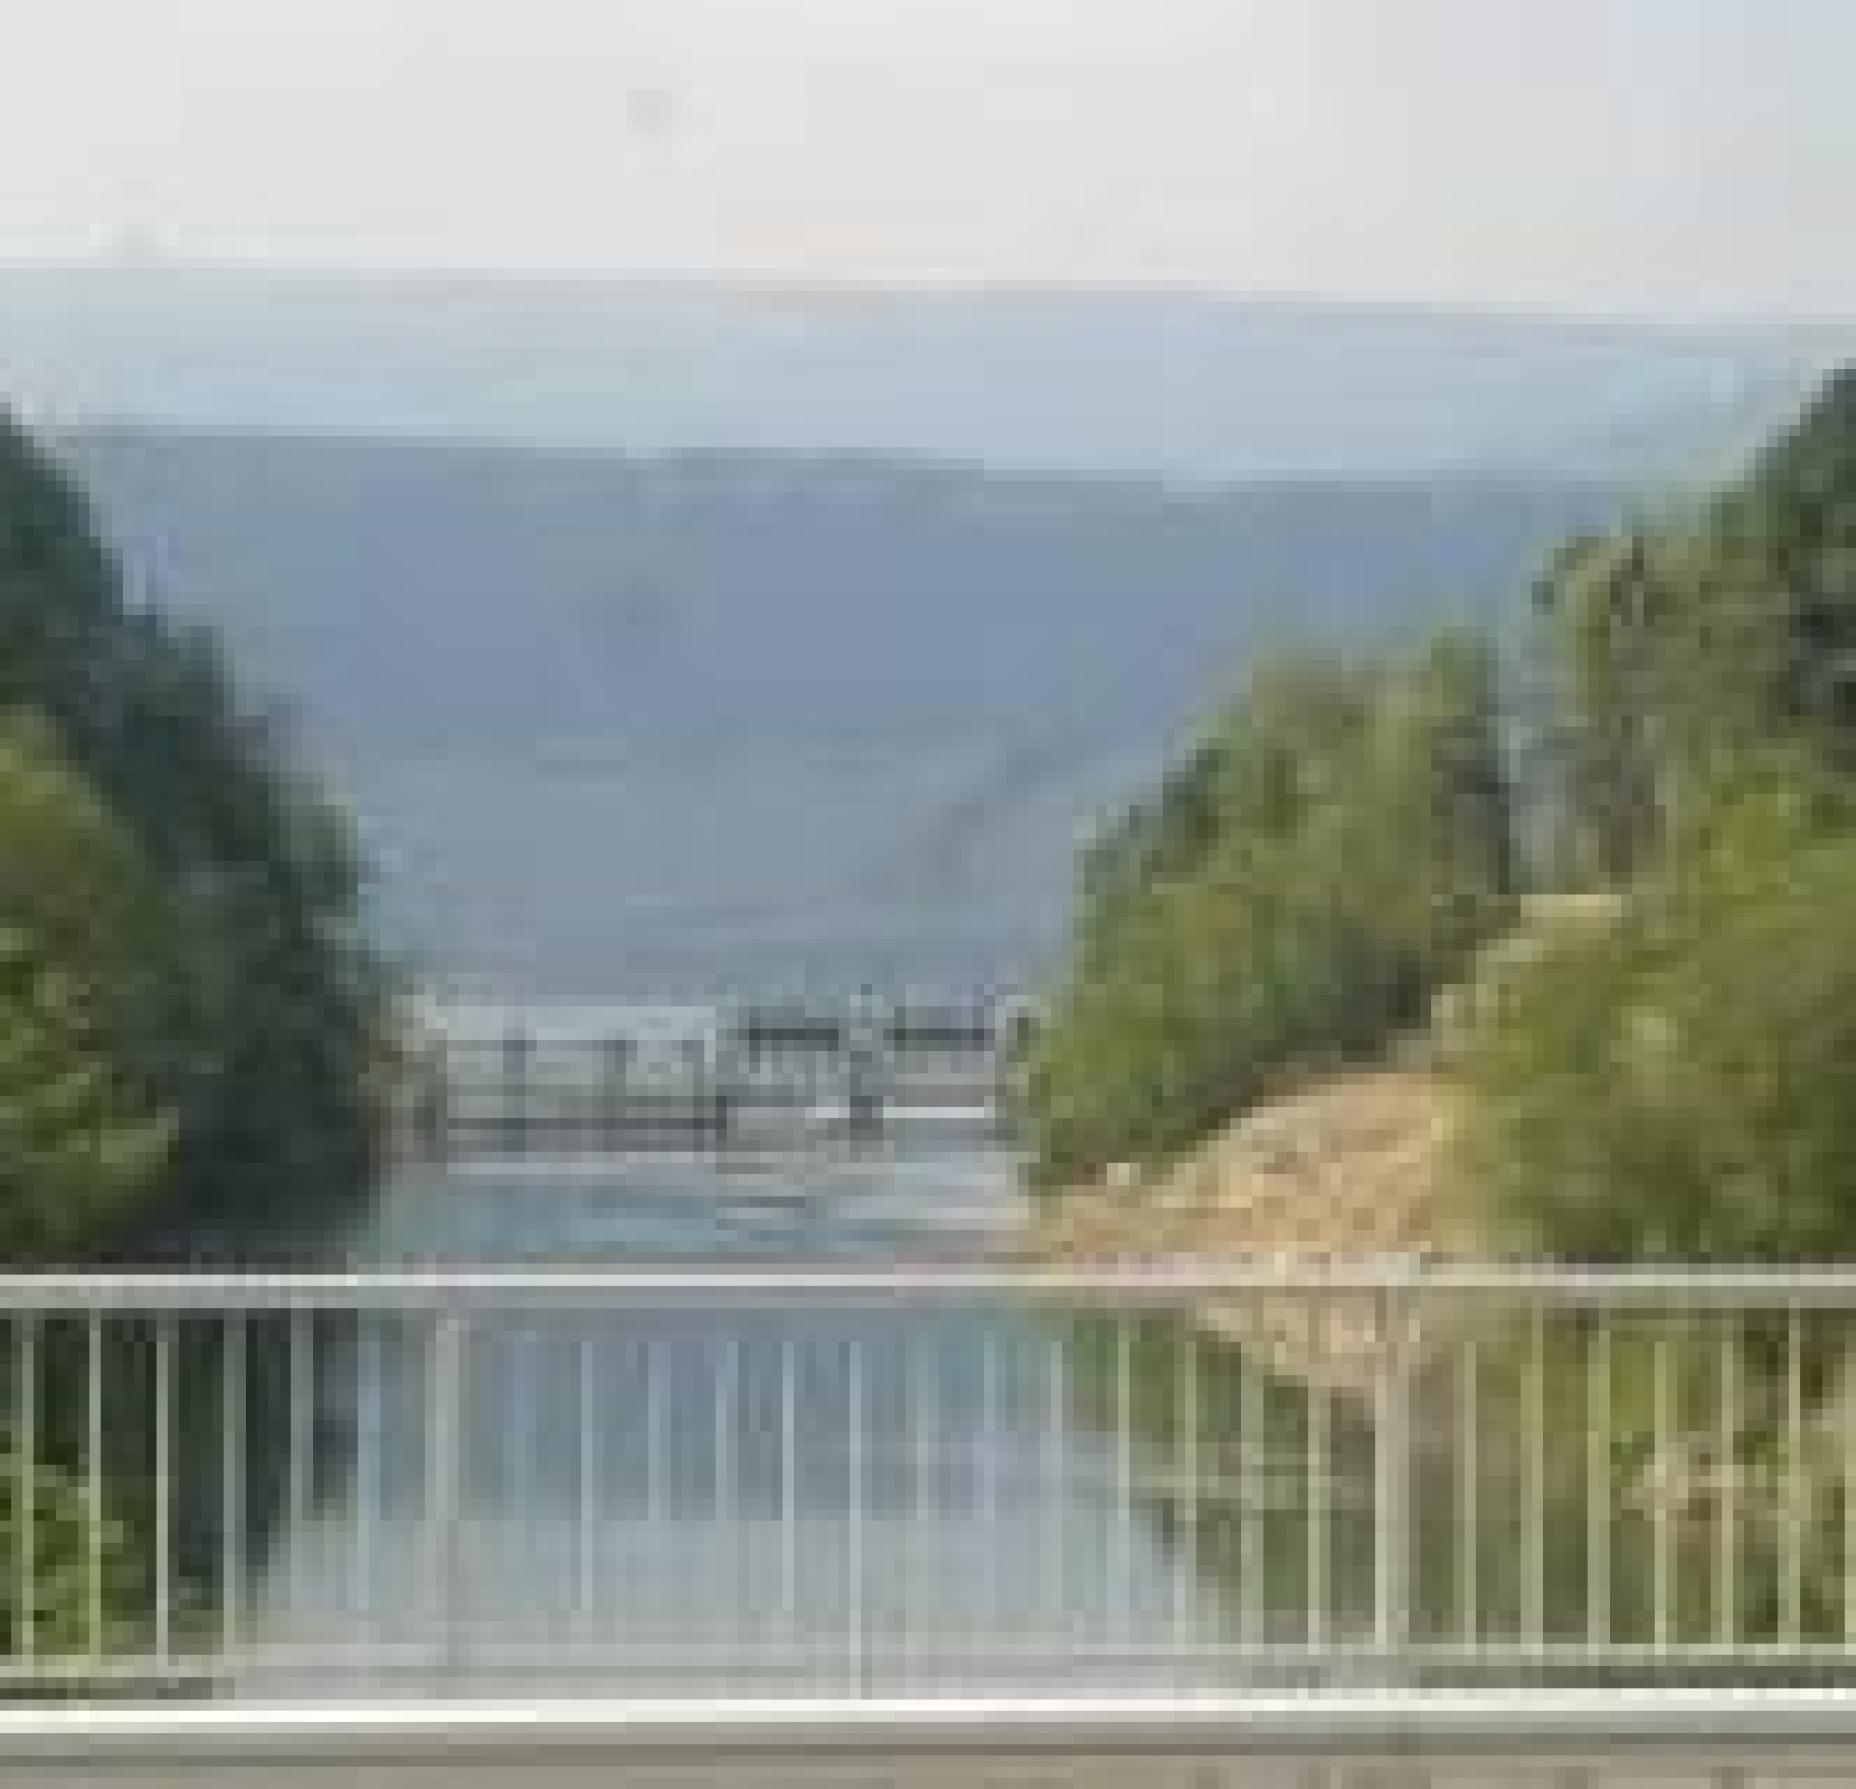 Aare-Hagneck Channel